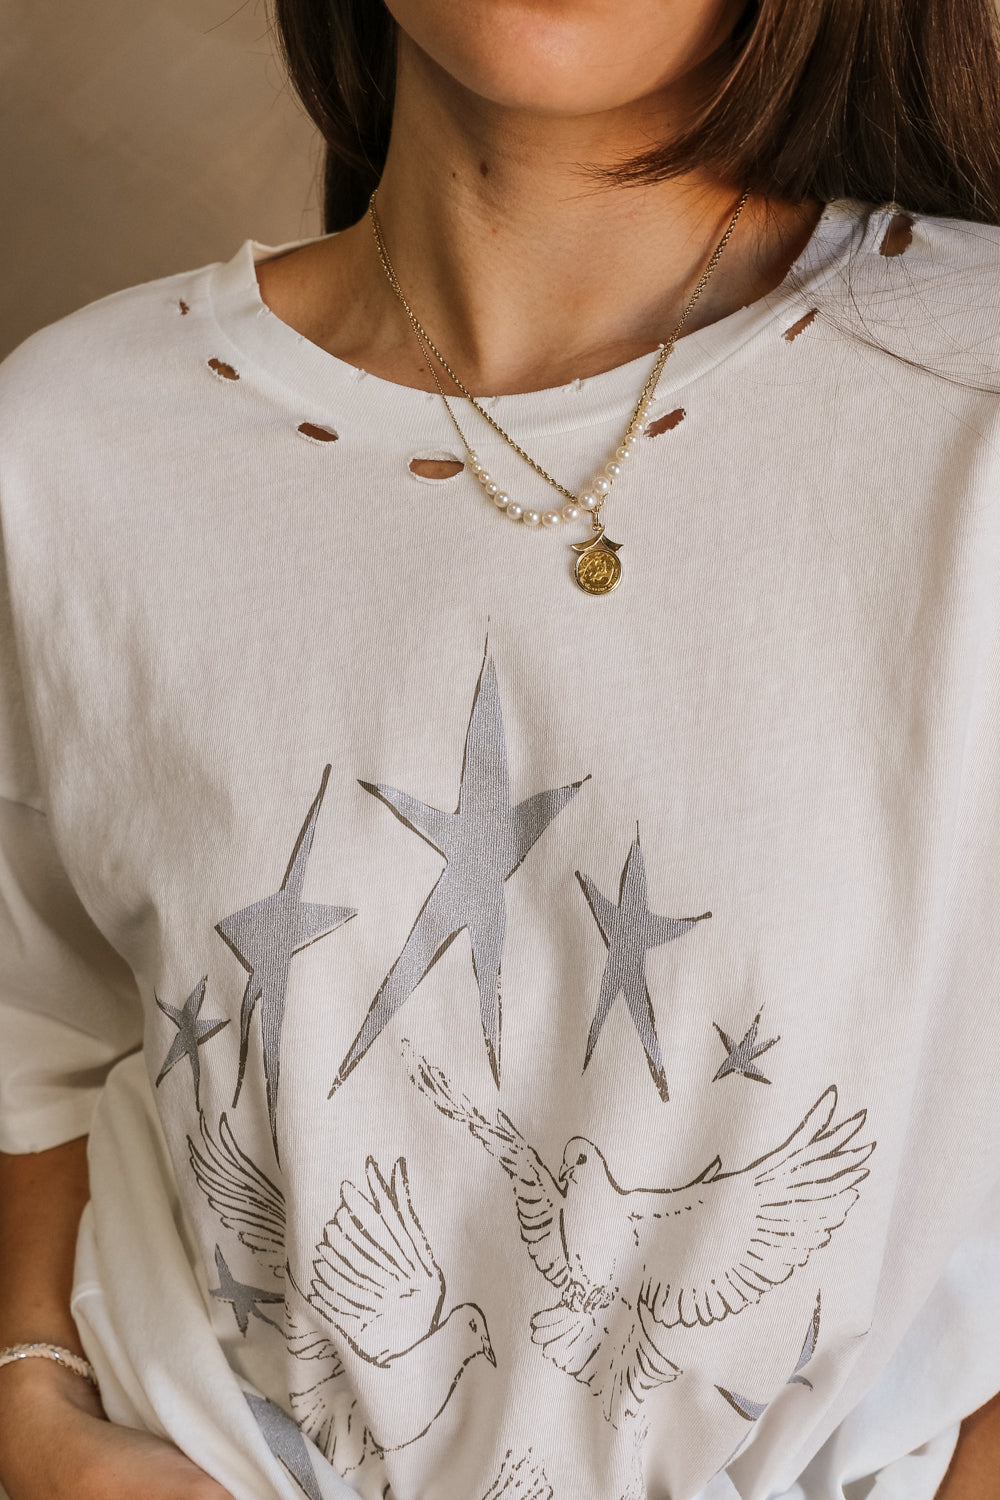 Close up view of female model wearing the Stars and Birds White Distressed Graphic Top which features White Cotton Fabric, Distressed Details, Short Sleeves, Round Neckline and Stars and Birds Graphic